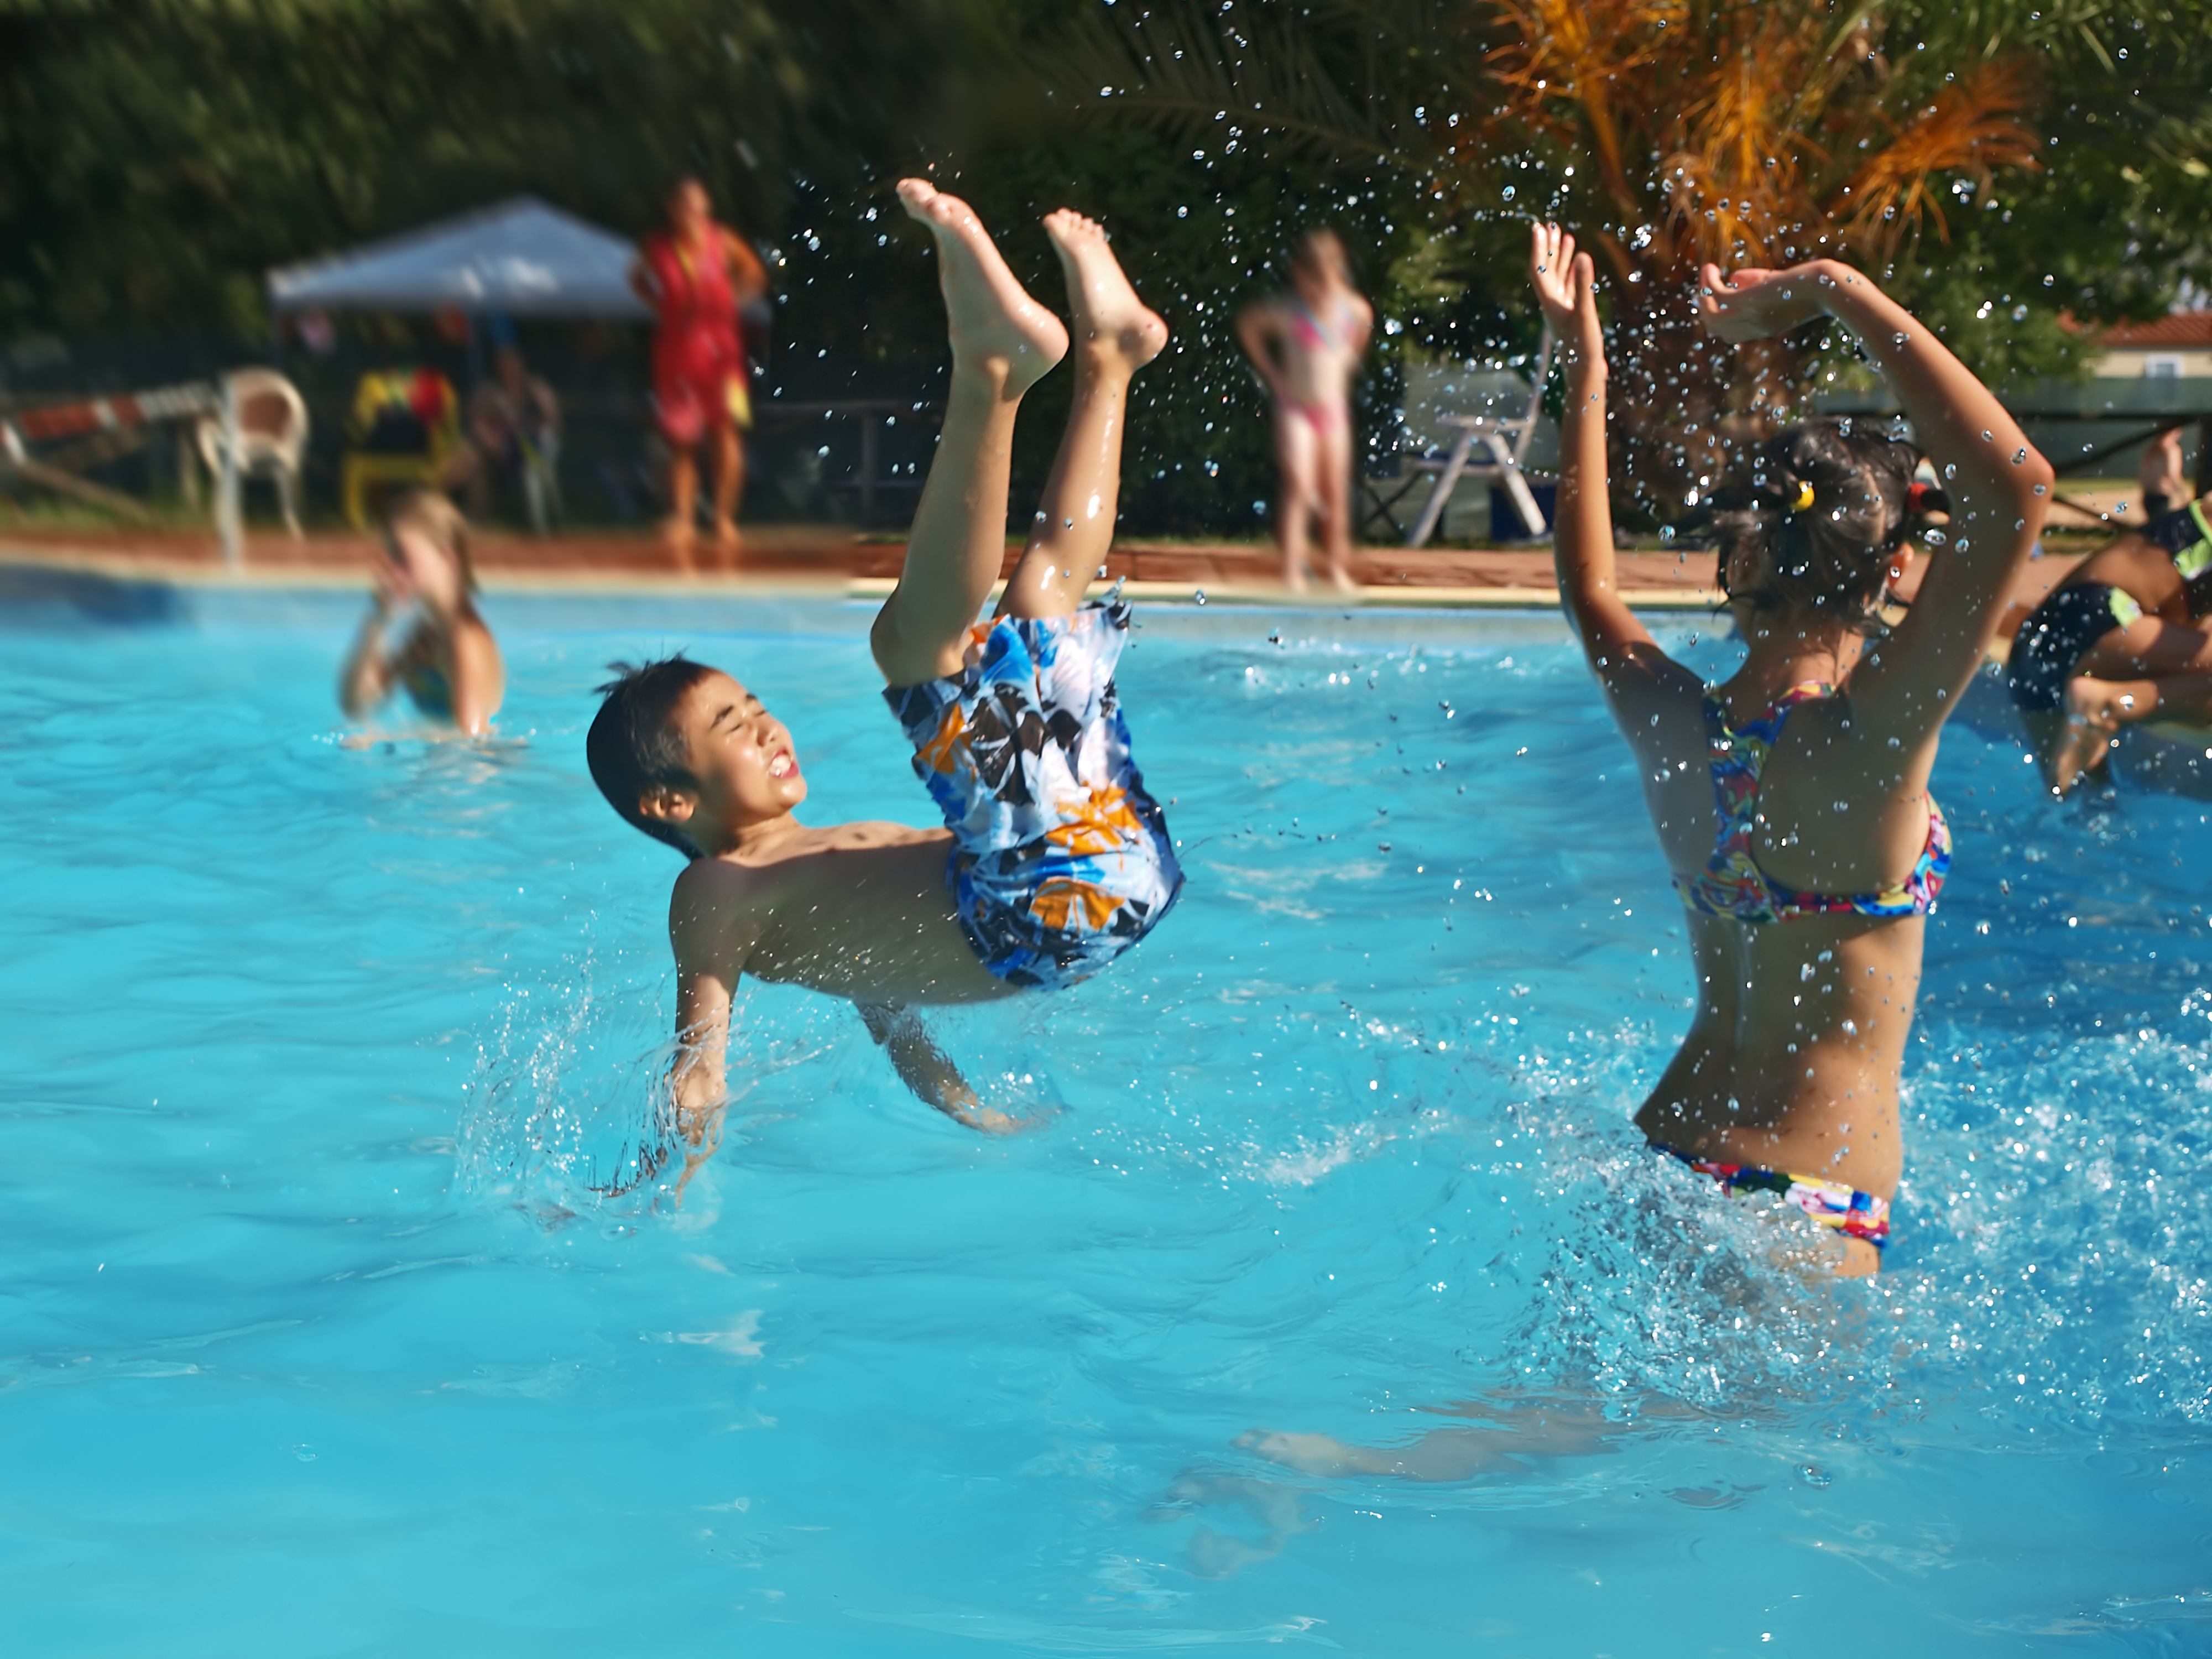 Diving Board Safety Tips - Swimming Pool Blog